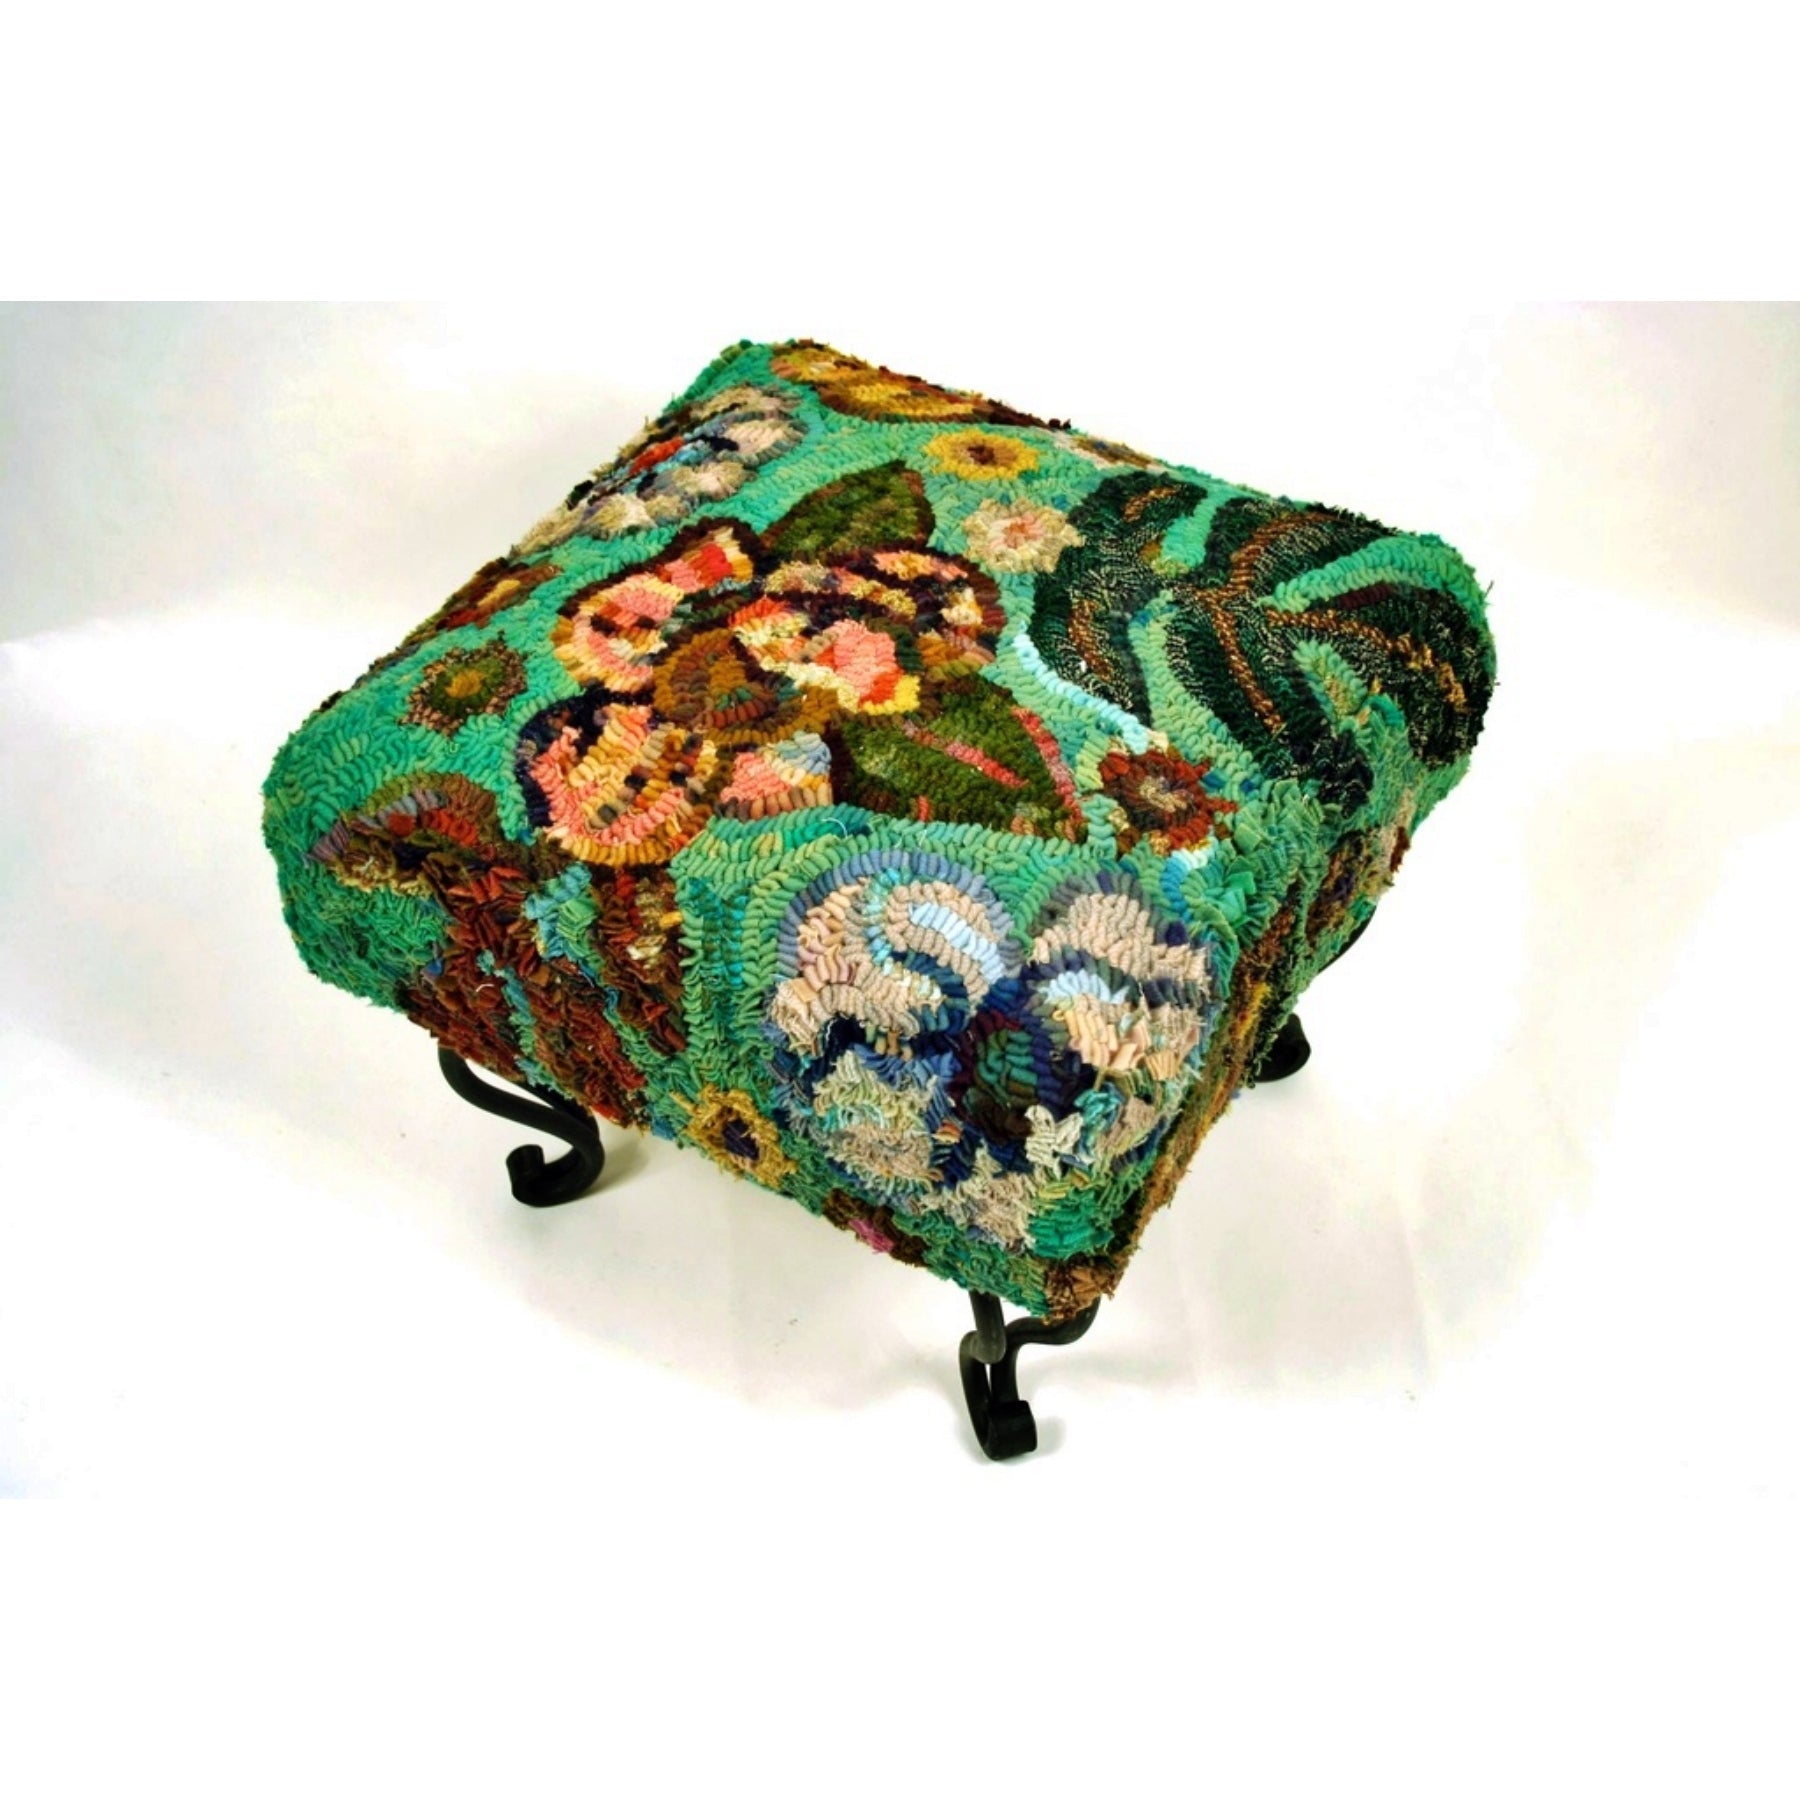 Proddy Floral - Square Footstool Pattern, rug hooked by Kim Nixon